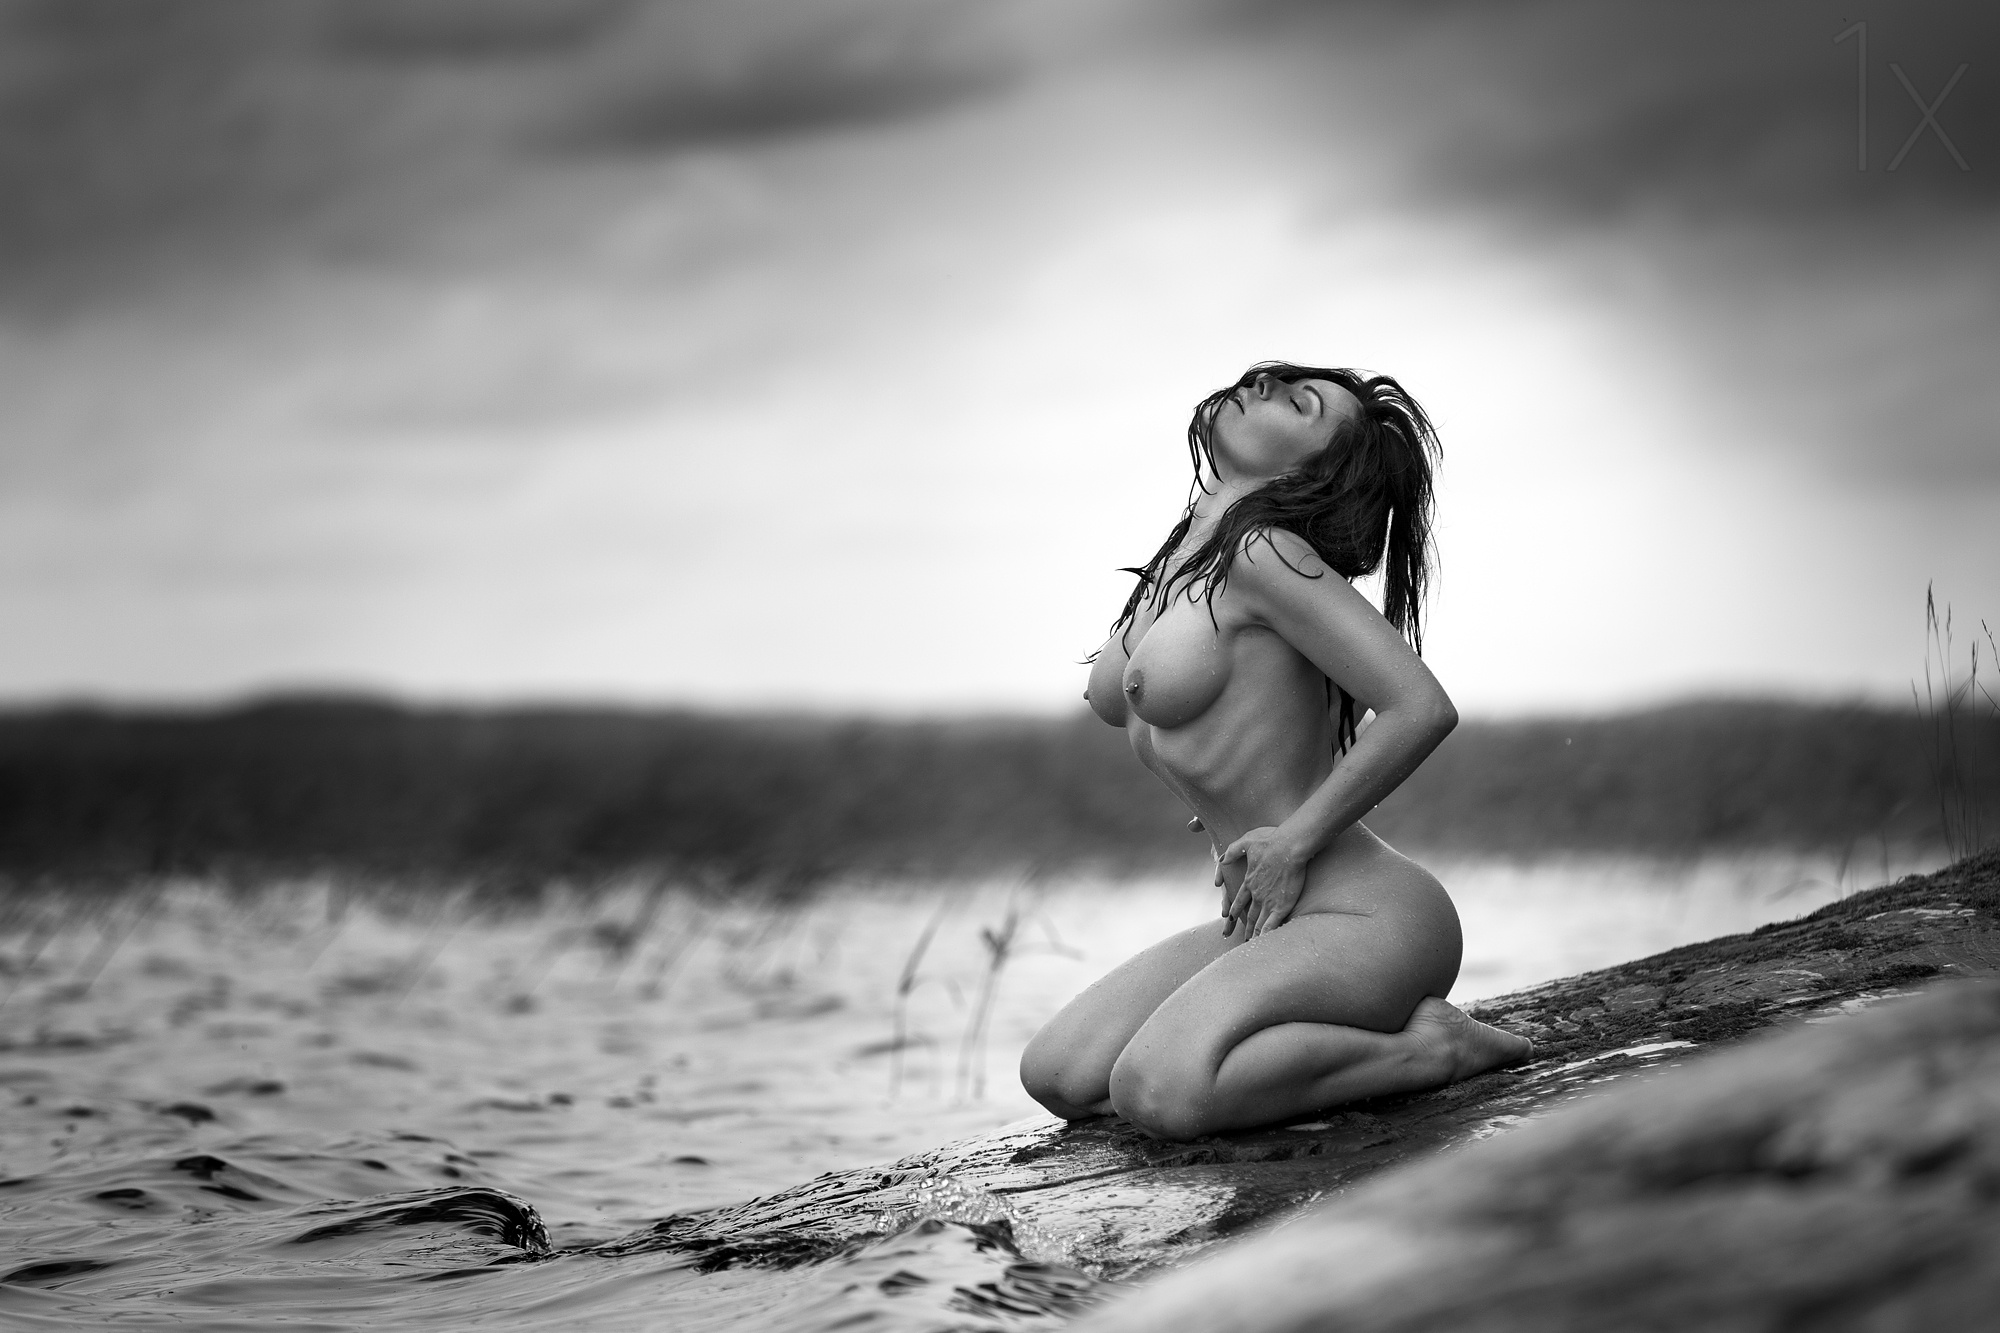 Black and white pictures of nude women